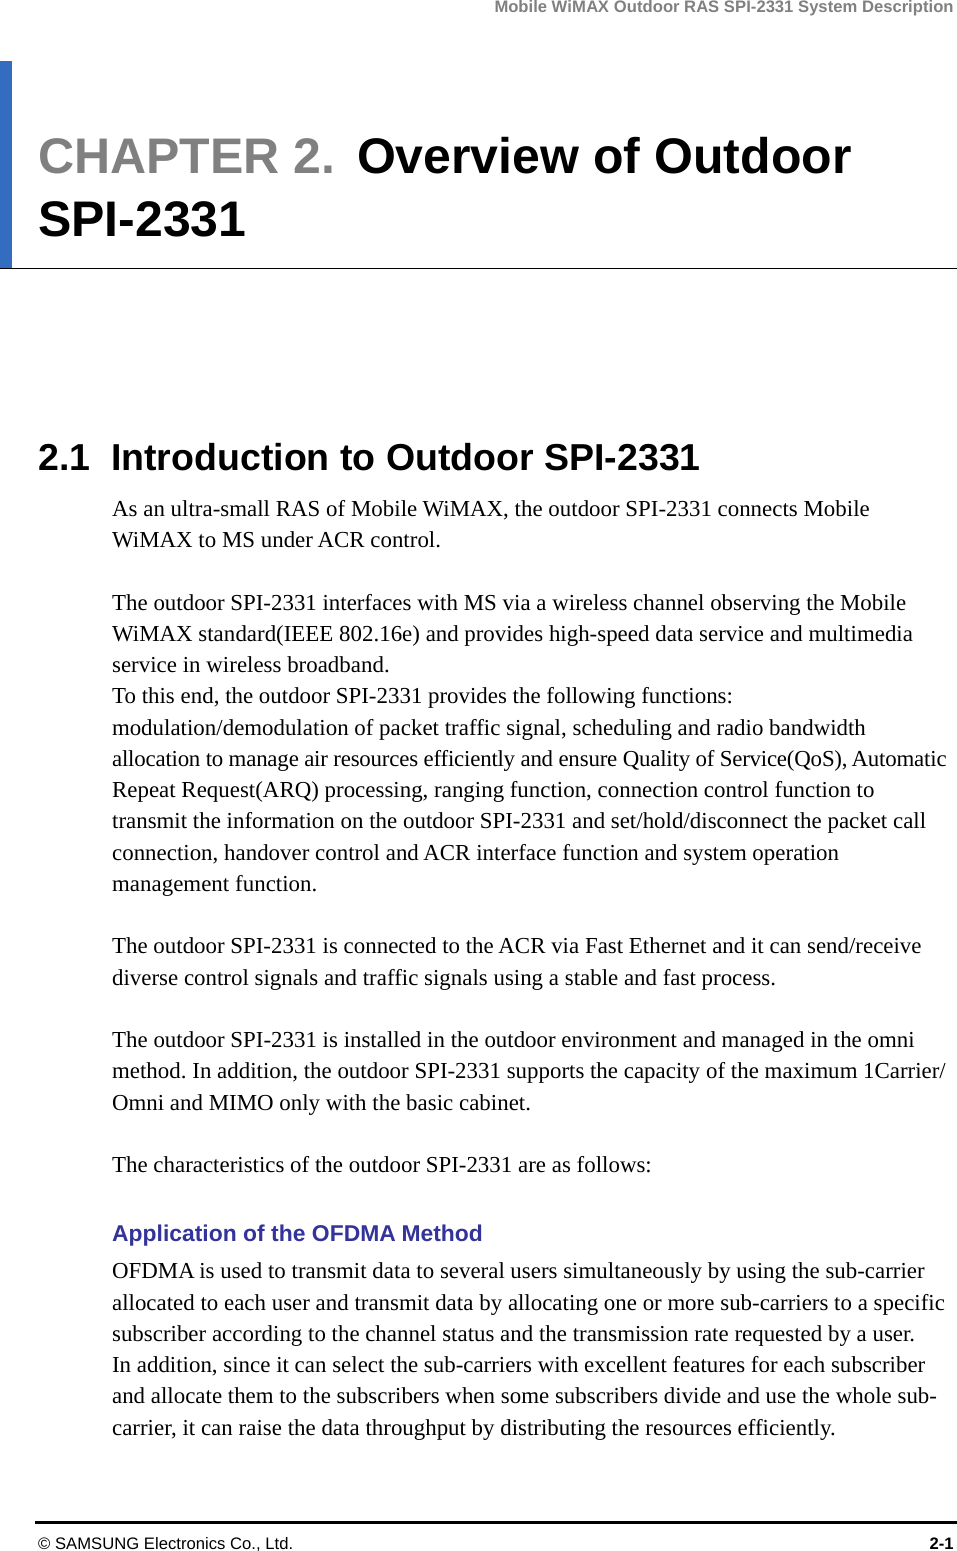 Mobile WiMAX Outdoor RAS SPI-2331 System Description © SAMSUNG Electronics Co., Ltd.  2-1 CHAPTER 2.  Overview of Outdoor SPI-2331      2.1  Introduction to Outdoor SPI-2331 As an ultra-small RAS of Mobile WiMAX, the outdoor SPI-2331 connects Mobile WiMAX to MS under ACR control.    The outdoor SPI-2331 interfaces with MS via a wireless channel observing the Mobile WiMAX standard(IEEE 802.16e) and provides high-speed data service and multimedia service in wireless broadband. To this end, the outdoor SPI-2331 provides the following functions: modulation/demodulation of packet traffic signal, scheduling and radio bandwidth allocation to manage air resources efficiently and ensure Quality of Service(QoS), Automatic Repeat Request(ARQ) processing, ranging function, connection control function to transmit the information on the outdoor SPI-2331 and set/hold/disconnect the packet call connection, handover control and ACR interface function and system operation management function.    The outdoor SPI-2331 is connected to the ACR via Fast Ethernet and it can send/receive diverse control signals and traffic signals using a stable and fast process.  The outdoor SPI-2331 is installed in the outdoor environment and managed in the omni method. In addition, the outdoor SPI-2331 supports the capacity of the maximum 1Carrier/ Omni and MIMO only with the basic cabinet.  The characteristics of the outdoor SPI-2331 are as follows:  Application of the OFDMA Method OFDMA is used to transmit data to several users simultaneously by using the sub-carrier allocated to each user and transmit data by allocating one or more sub-carriers to a specific subscriber according to the channel status and the transmission rate requested by a user.   In addition, since it can select the sub-carriers with excellent features for each subscriber and allocate them to the subscribers when some subscribers divide and use the whole sub-carrier, it can raise the data throughput by distributing the resources efficiently. 